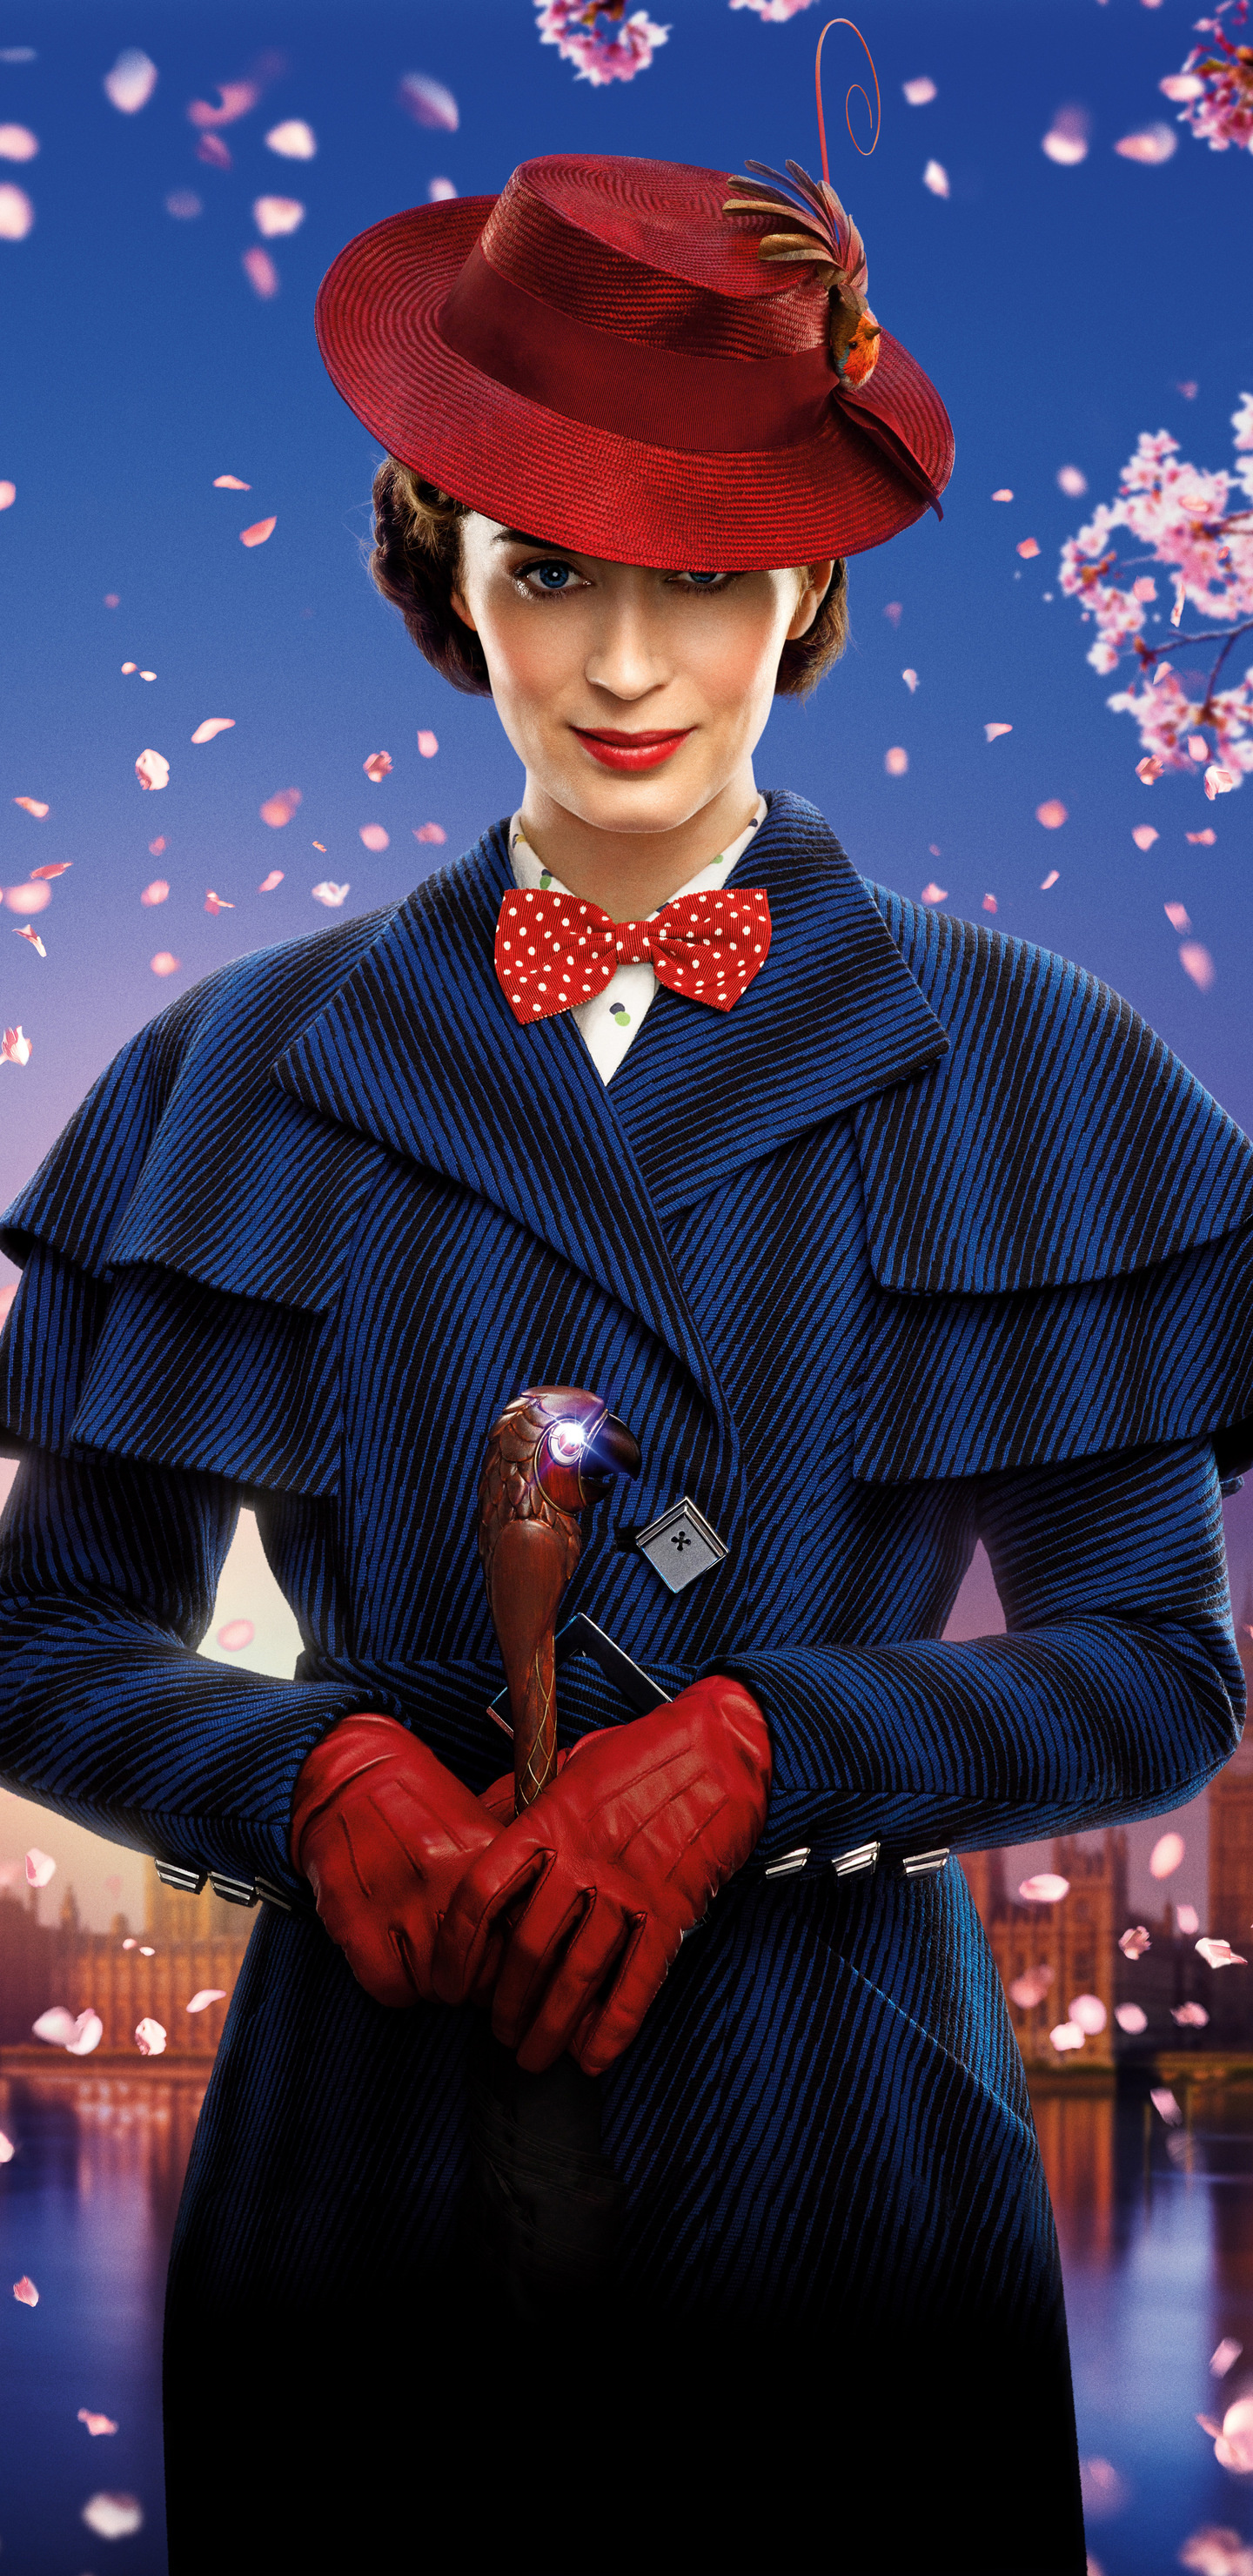 Mary Poppins Returns, 2018 Movie, Emily Blunt, Stunning wallpapers, 1440x2960 HD Handy